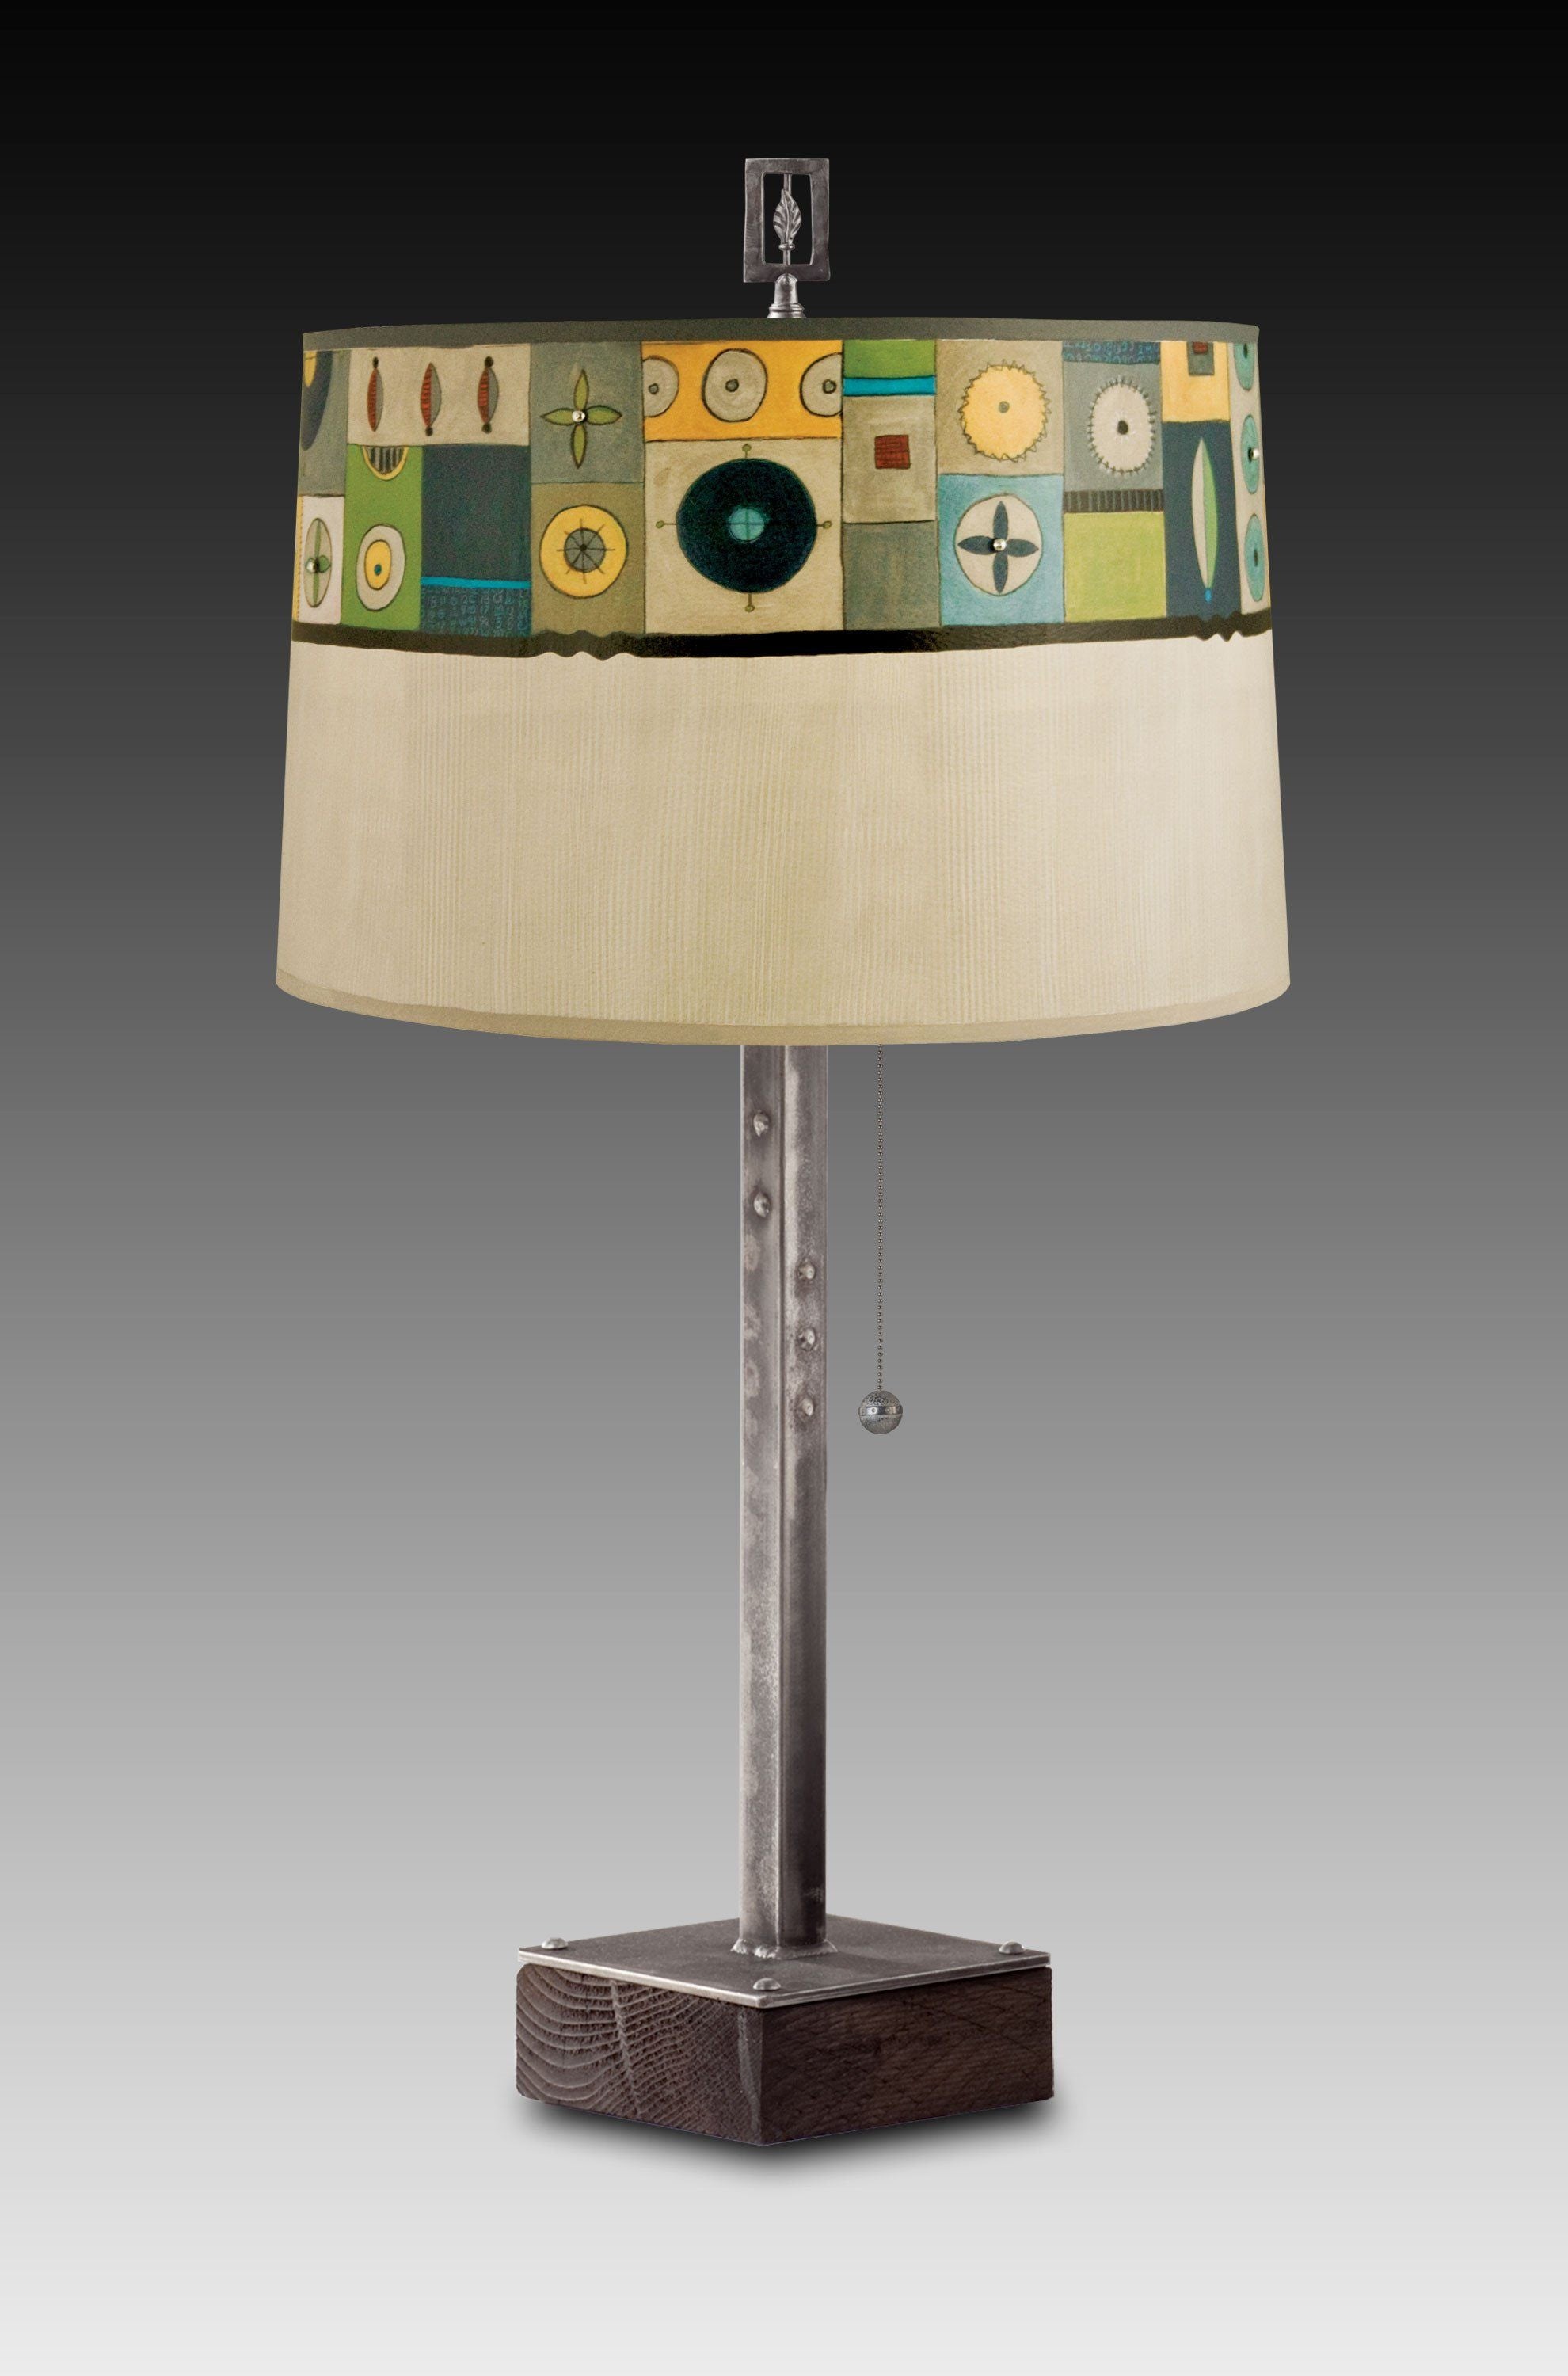 Janna Ugone & Co Table Lamps Steel Table Lamp on Wood with Large Drum Shade in Lucky Mosaic Oyster